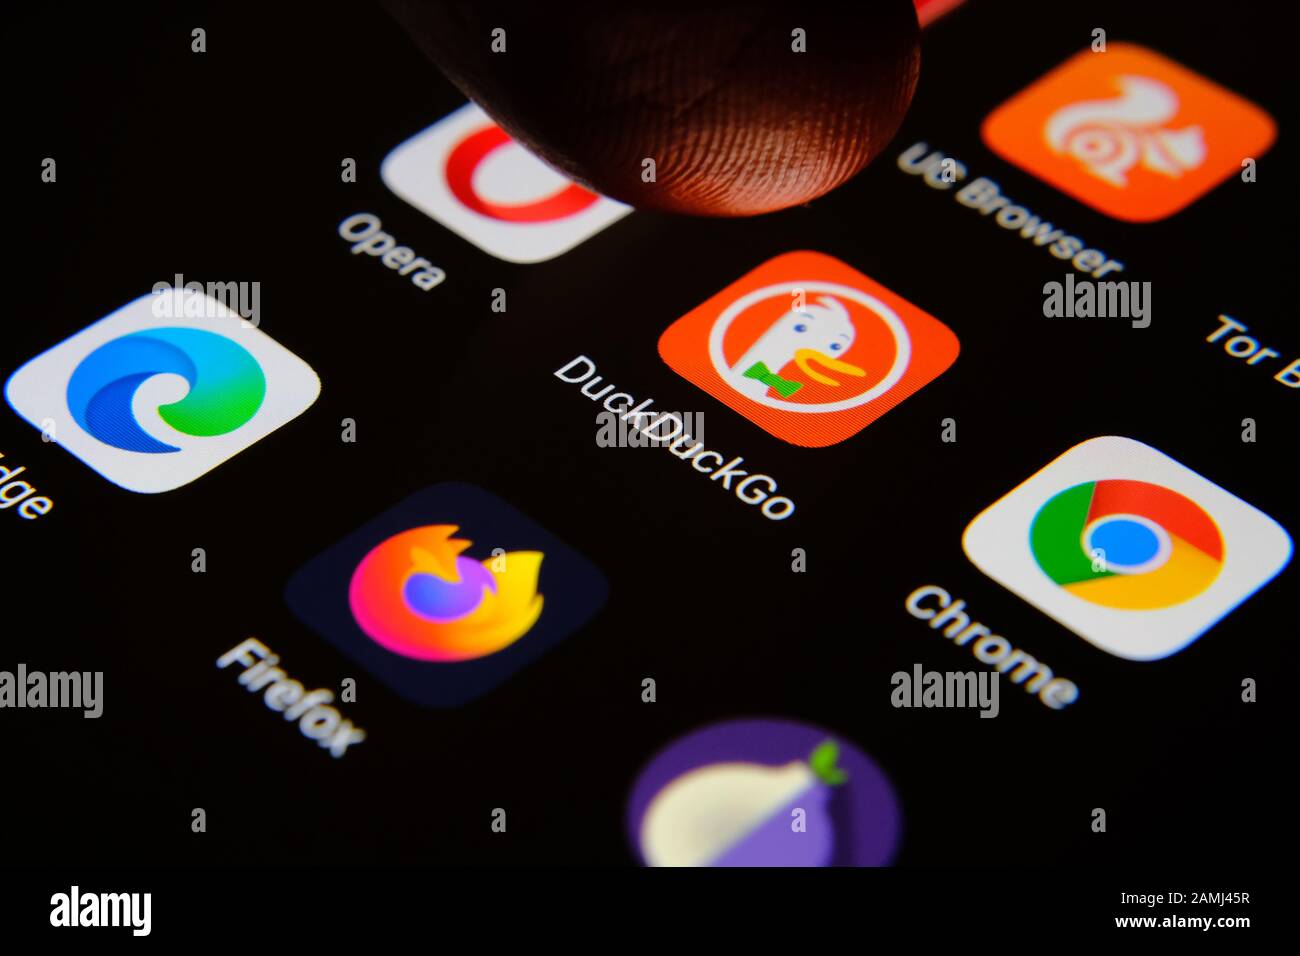 DuckDuckGo internet browser app surrounded by competitors and finger of user selecting it. Concept for competition. Macro photo. Stock Photo